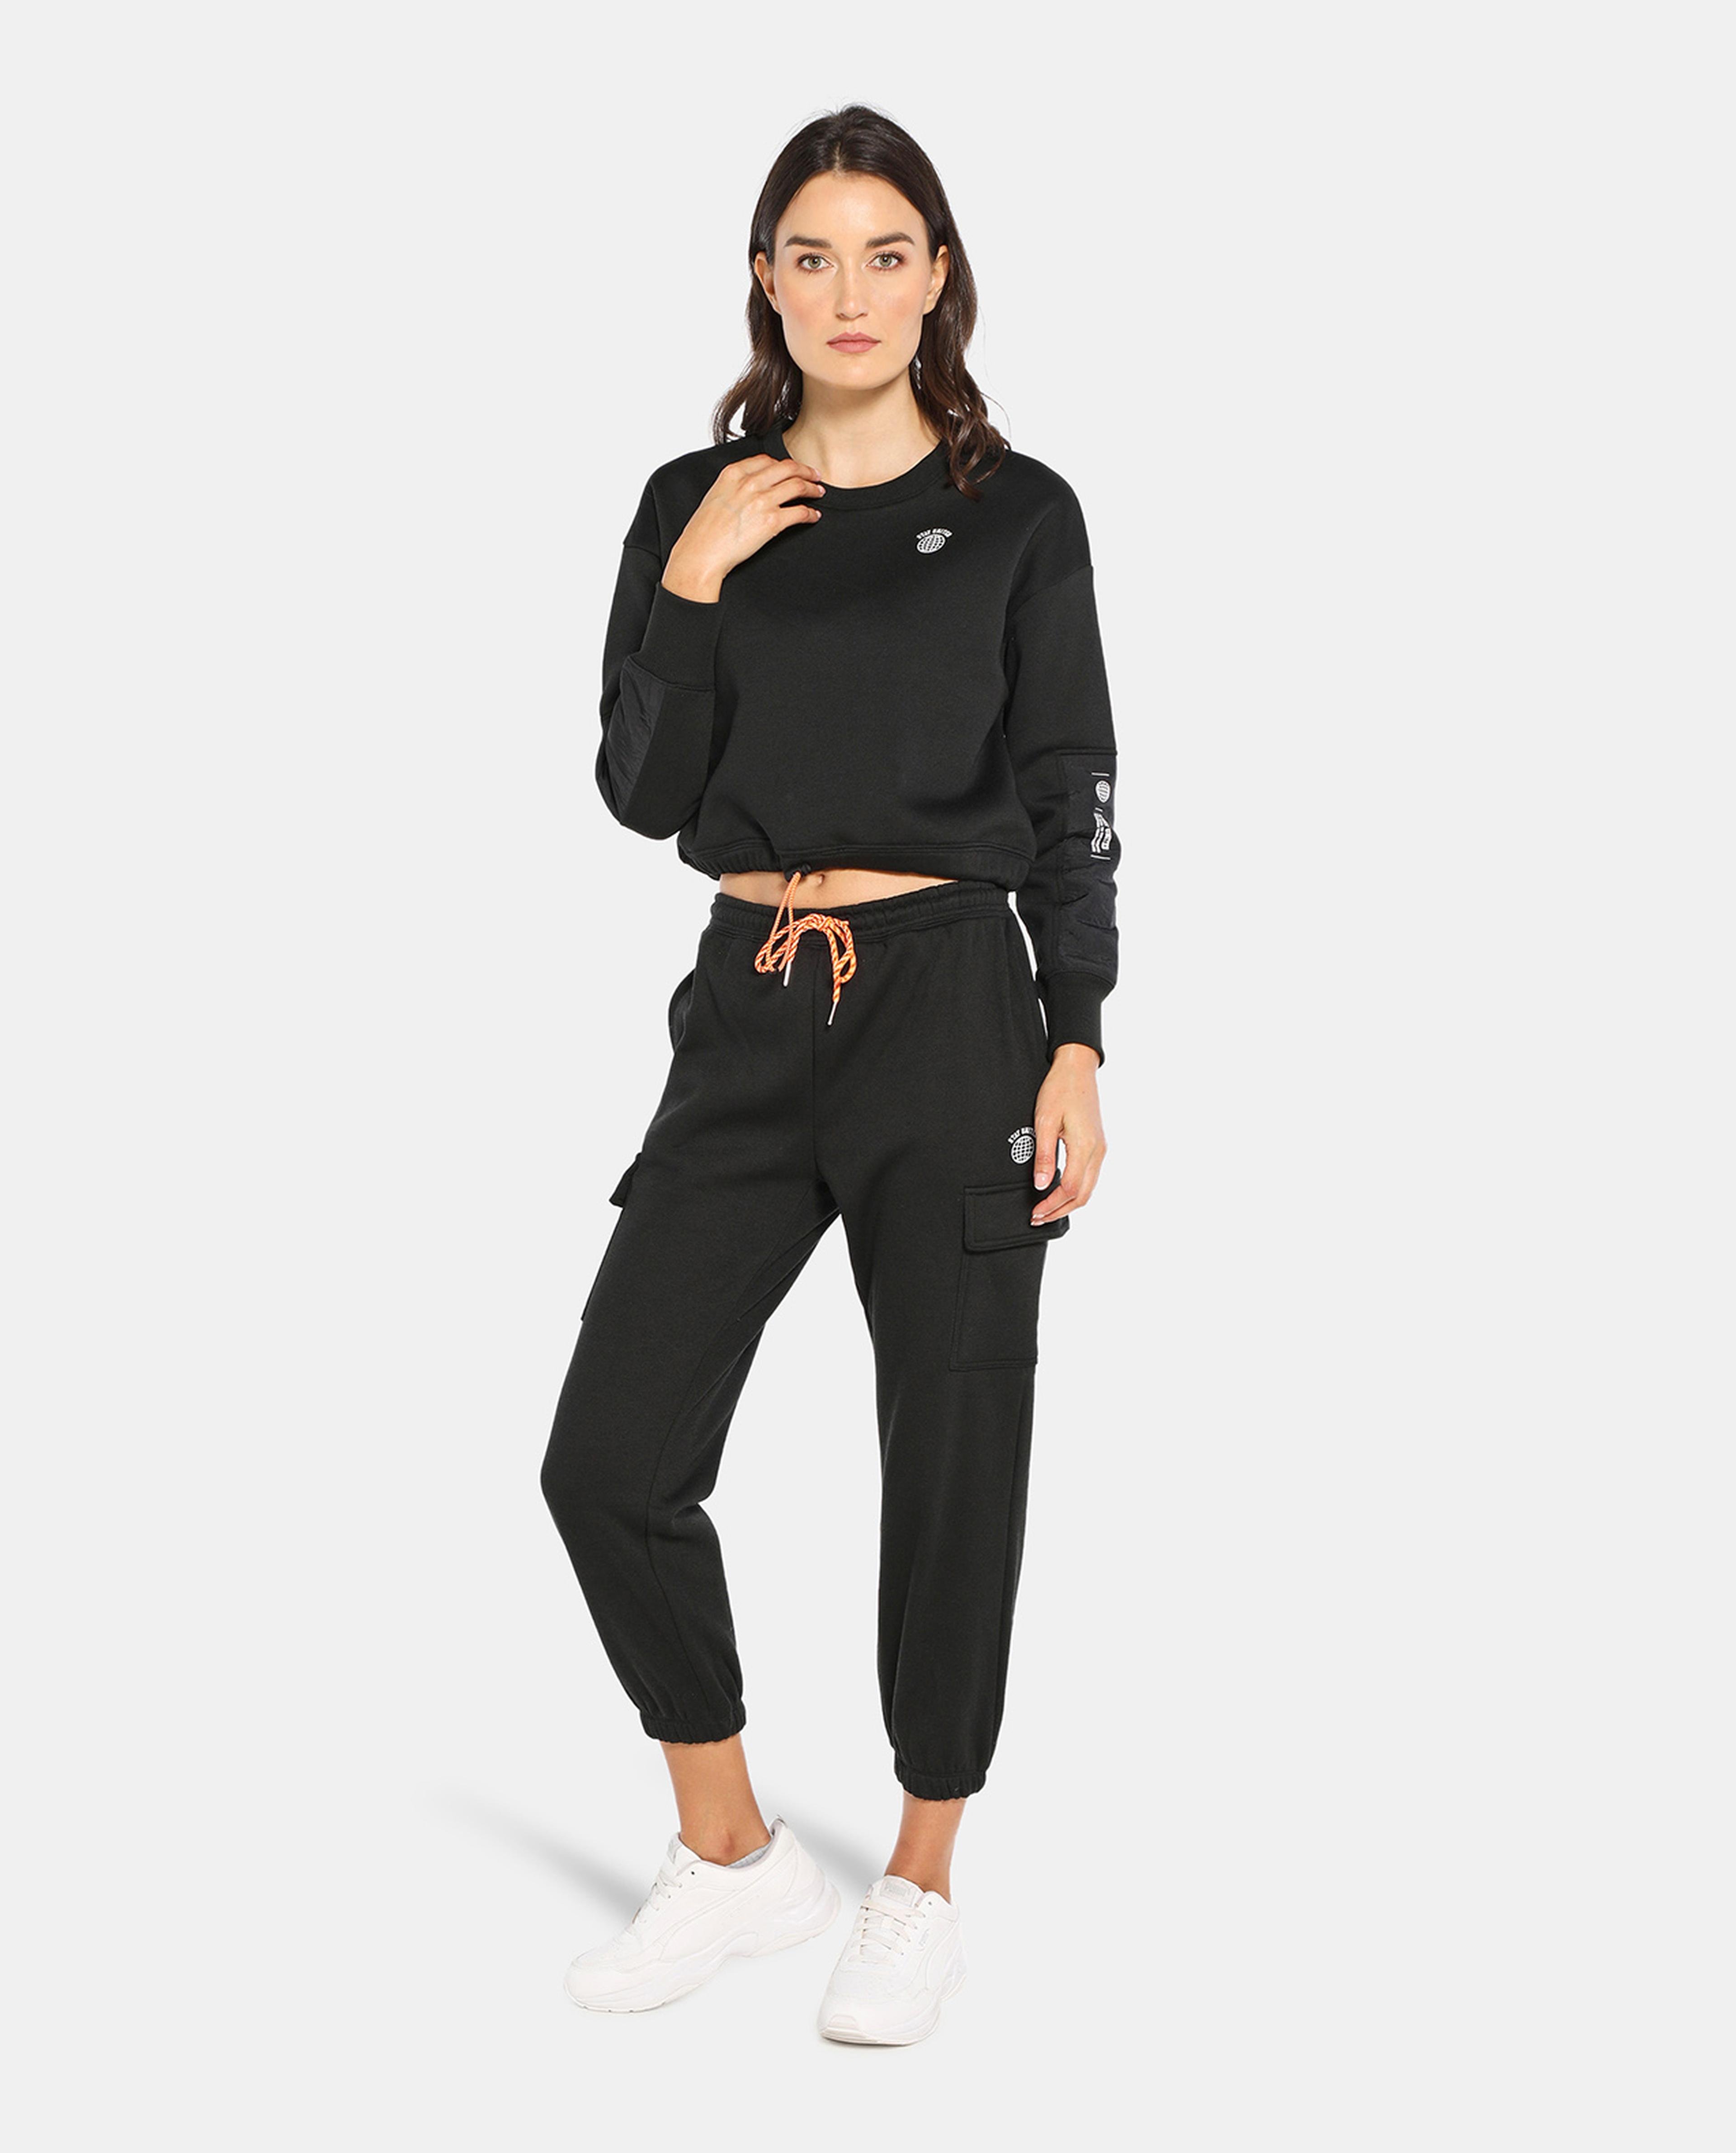 Black Polyester Sweater Top